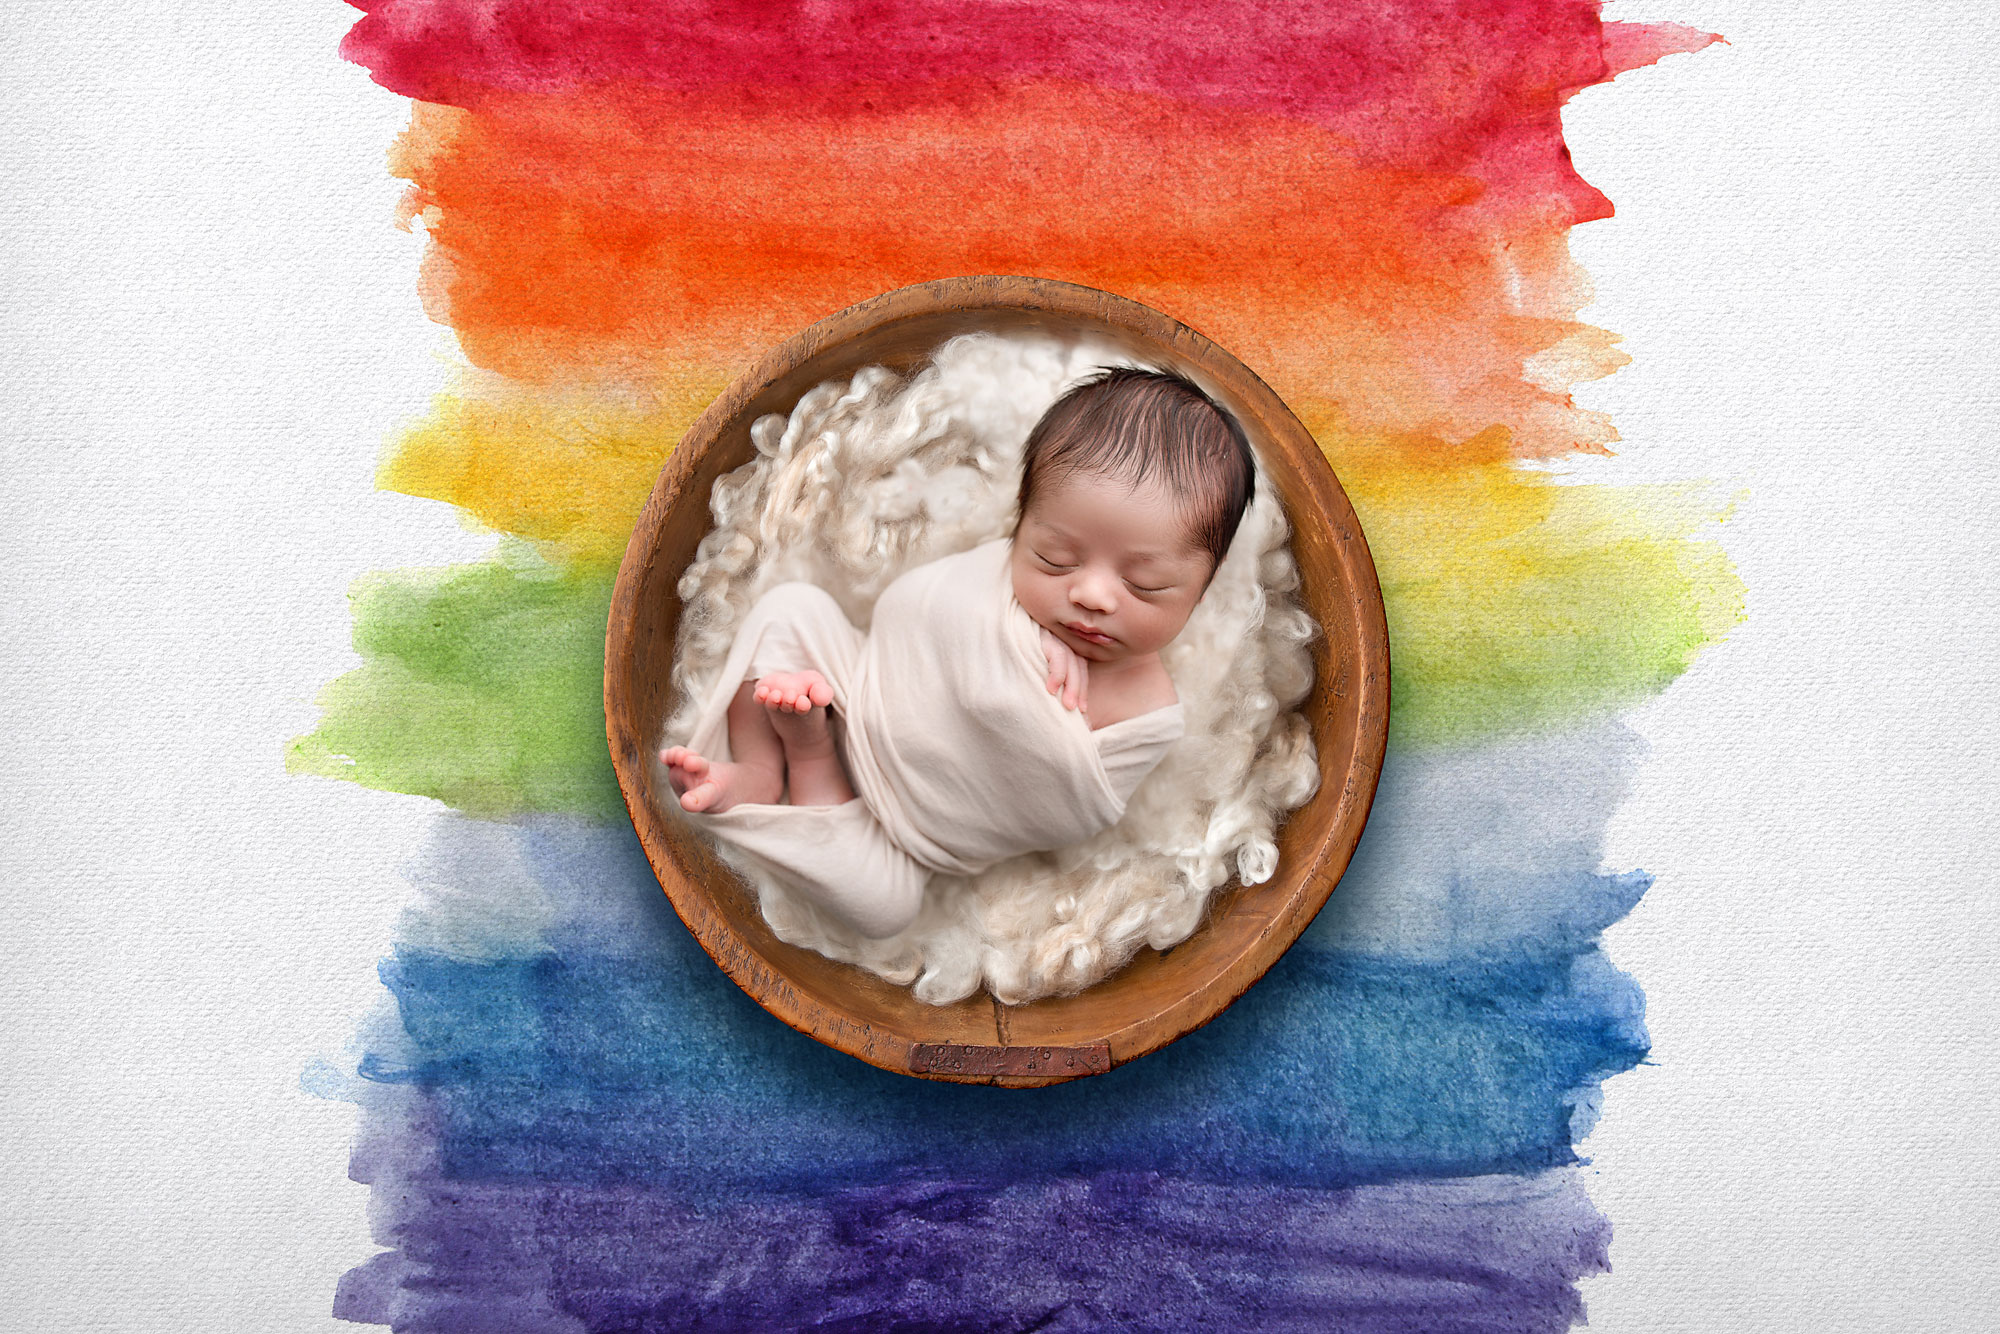 middlesex county NJ newborn baby photographer rainbow baby, indian festival of color holi